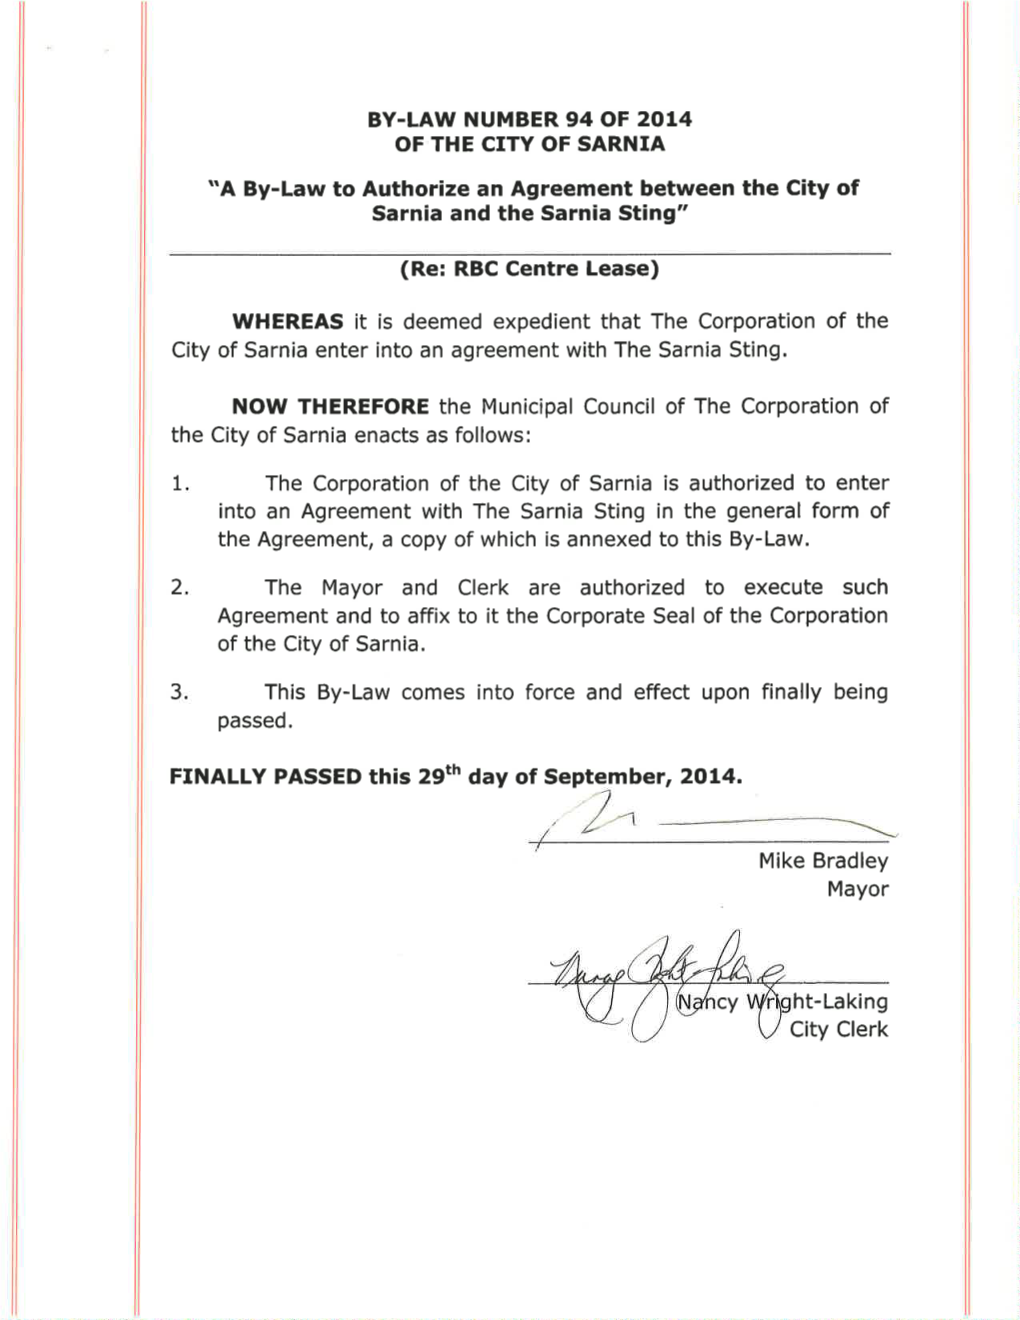 A By-Law to Authorize an Agreement Between the City of The